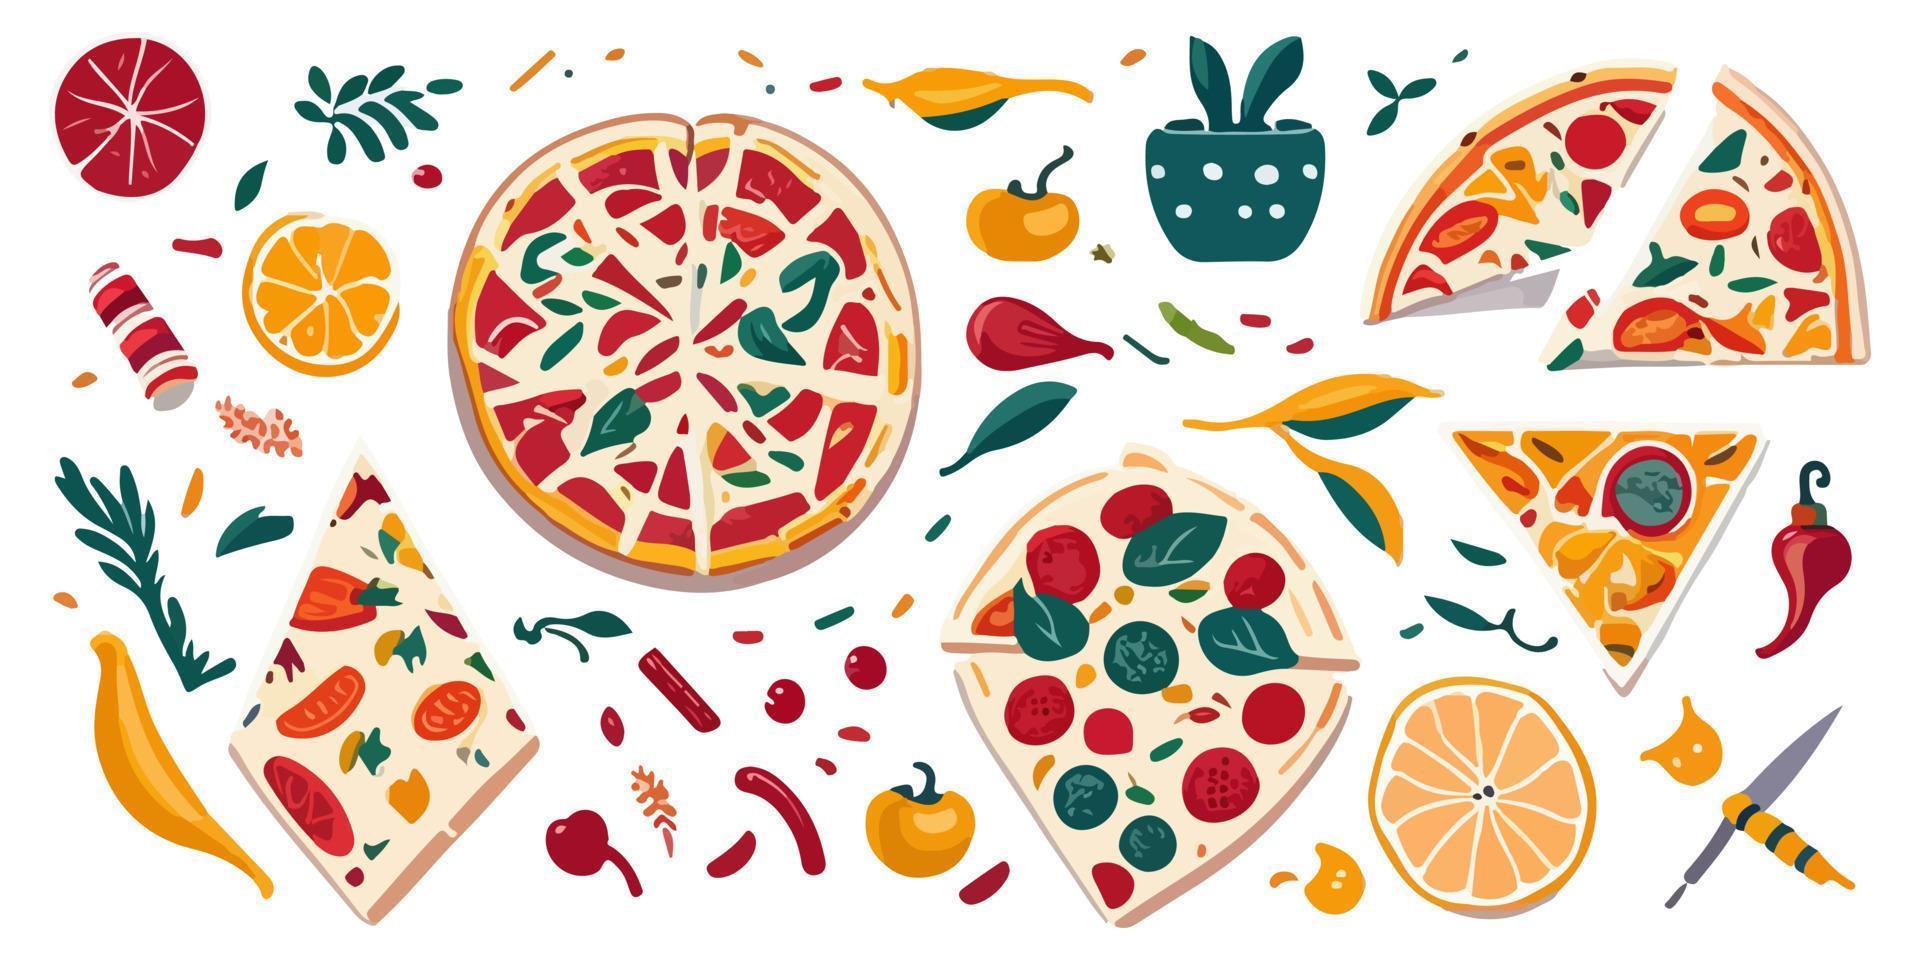 Delicious toppings on these flat vector pizza slices for your design needs